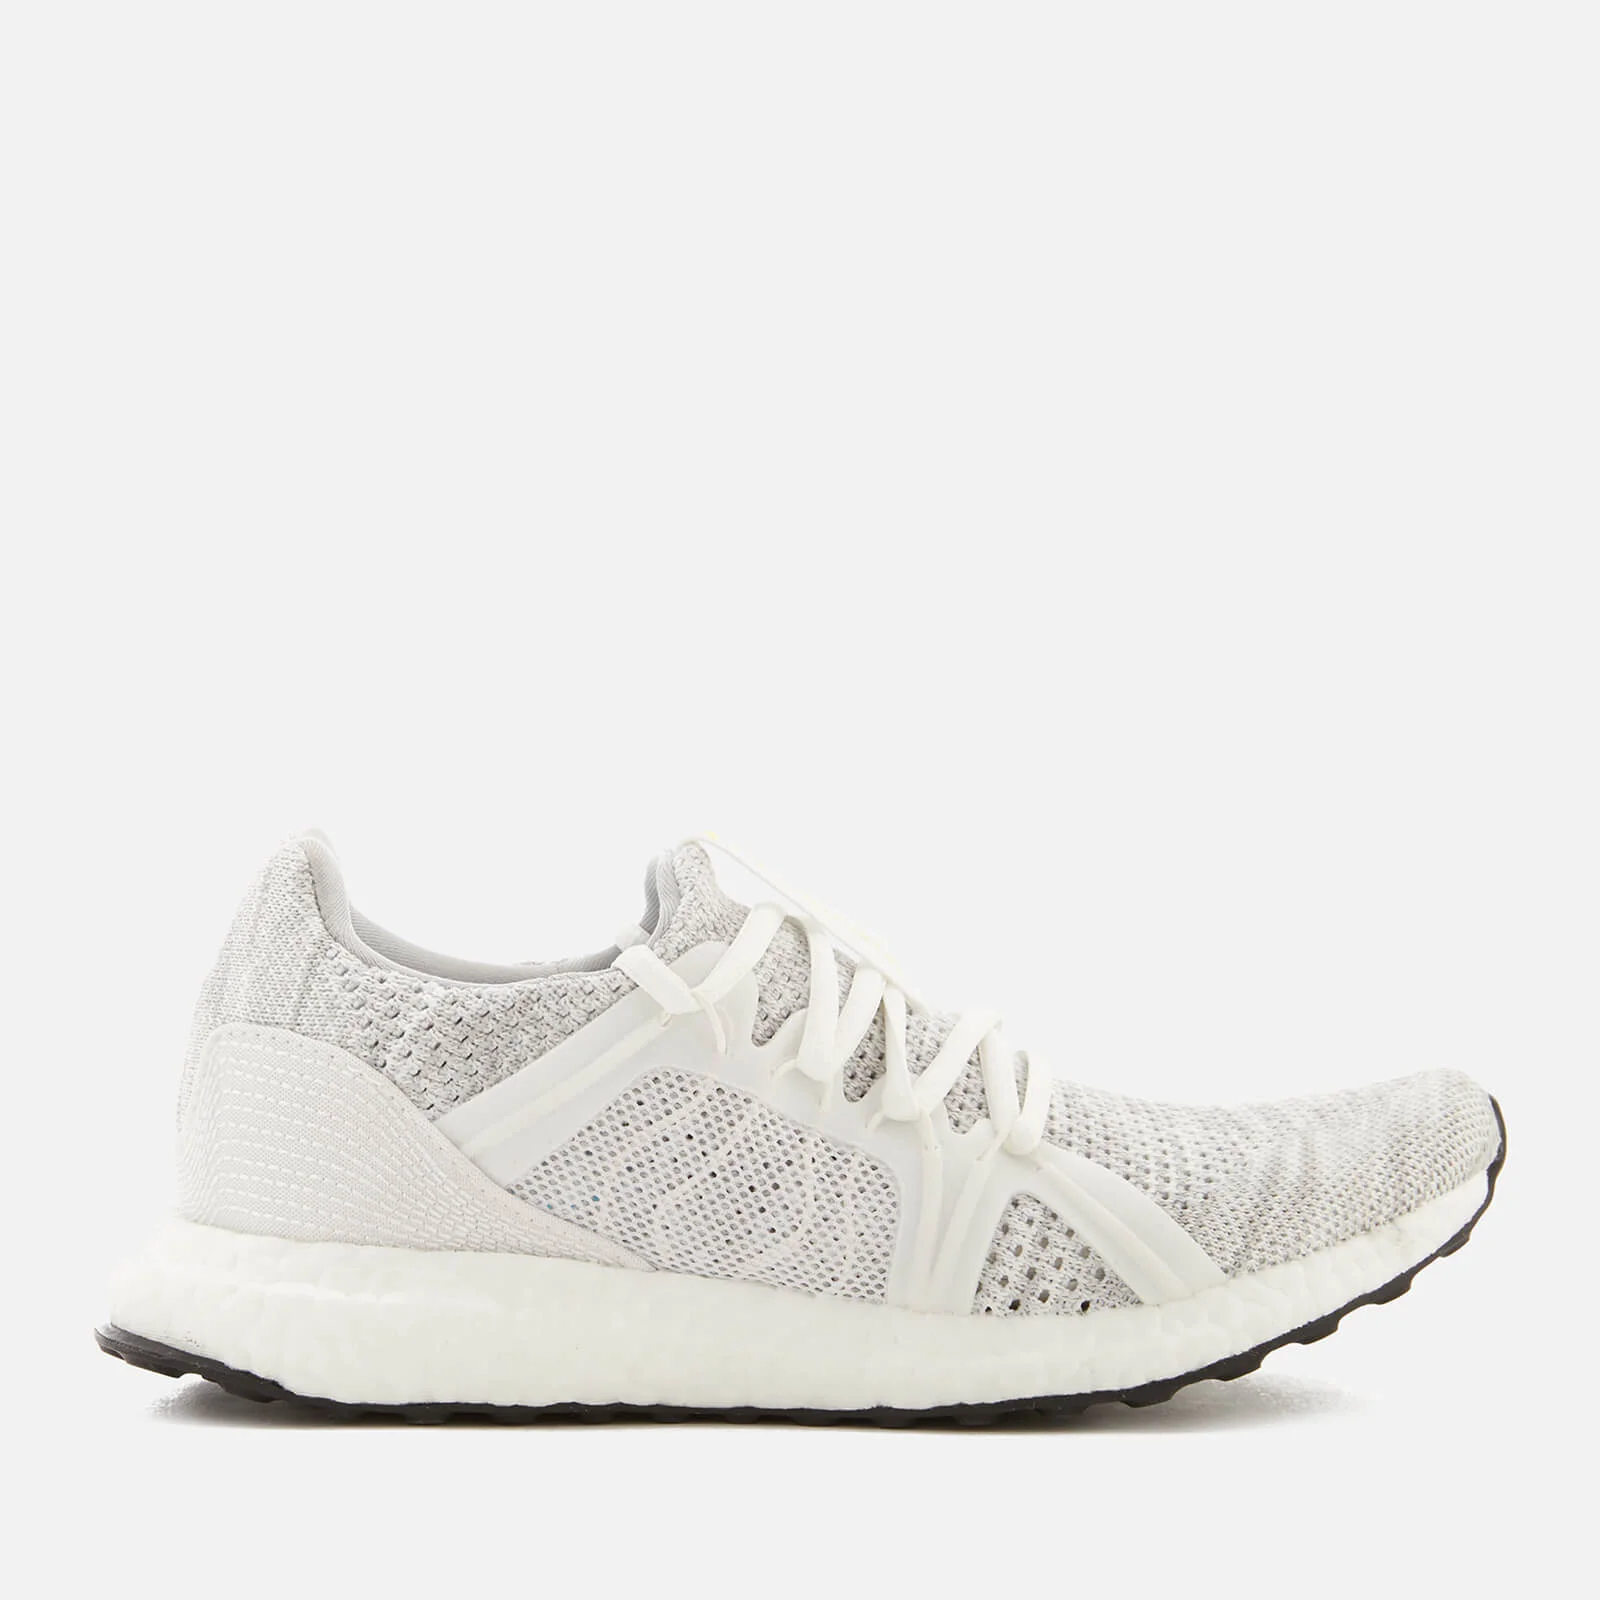 adidas by Stella McCartney Women's Ultraboost Parley Trainers - Stone/Core White/Mirror Blue Image 1